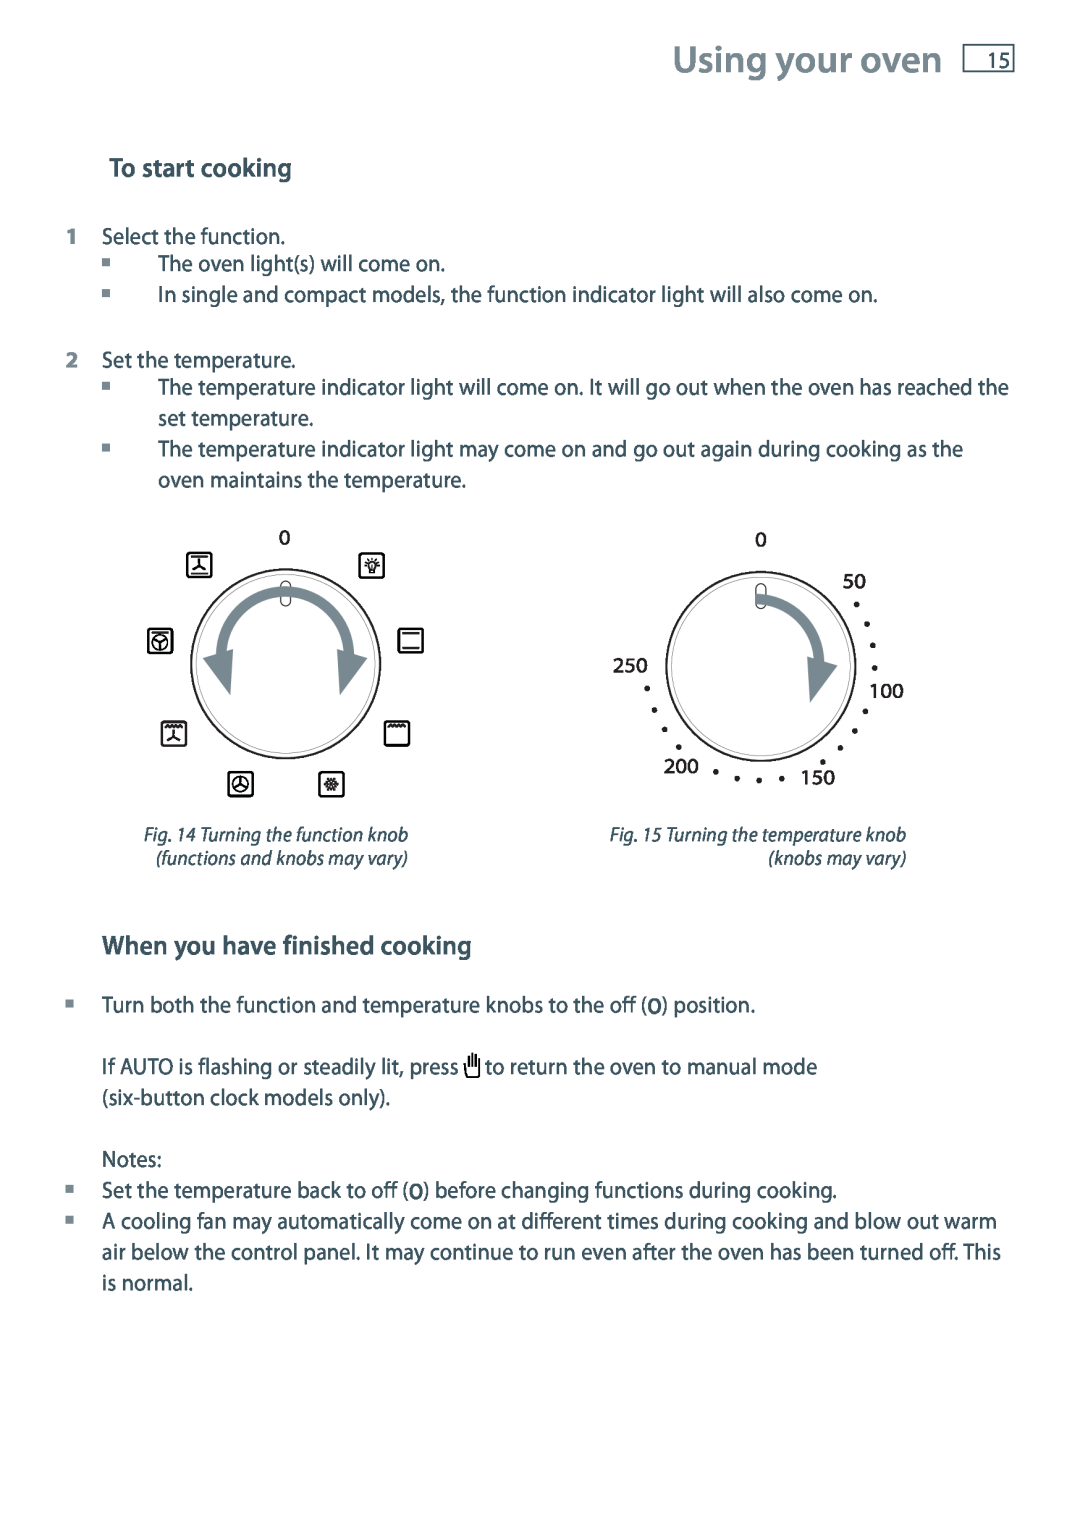 Fisher & Paykel OB60 installation instructions Using your oven, To start cooking, When you have finished cooking 